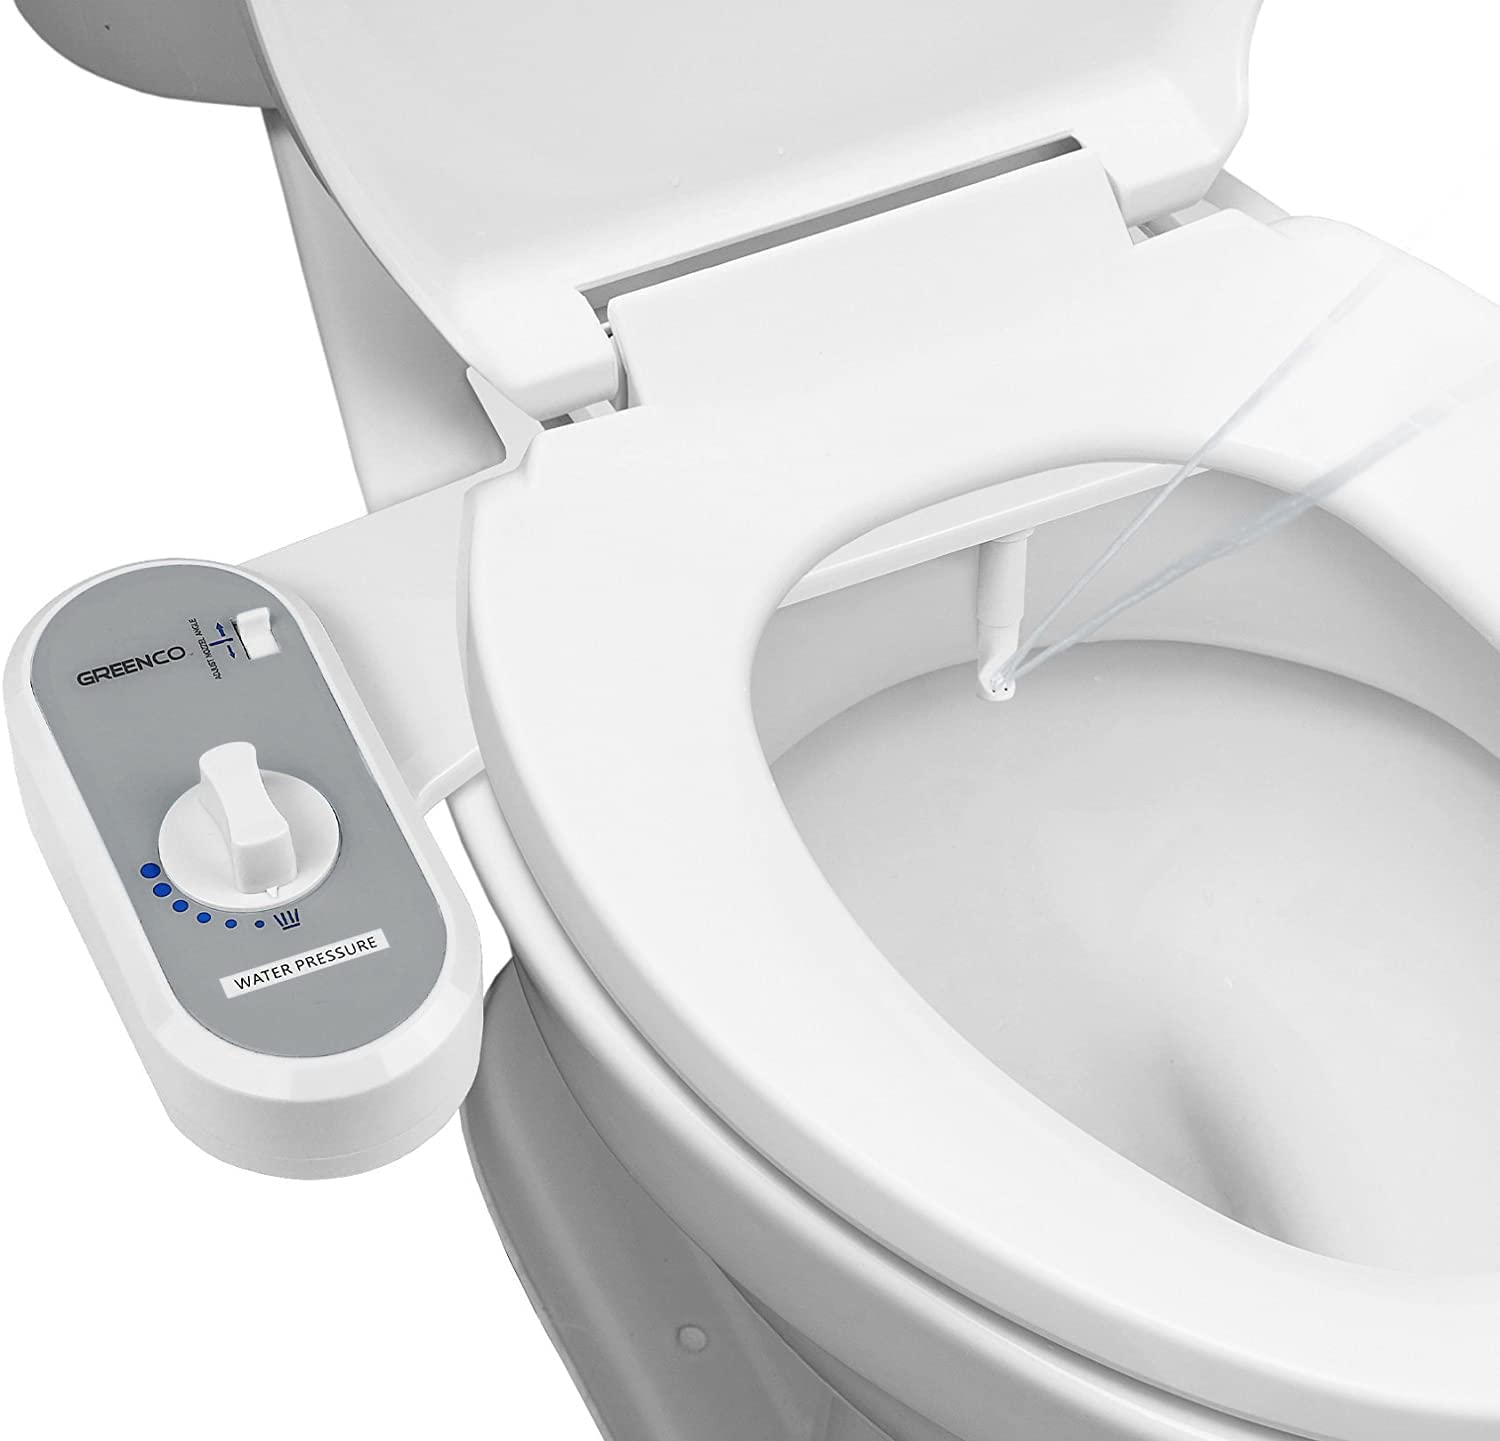 Greenco Bidet Fresh Water Spray Non-Electric Mechanical | Bidet attachment for Toilet Seat - image 4 of 8